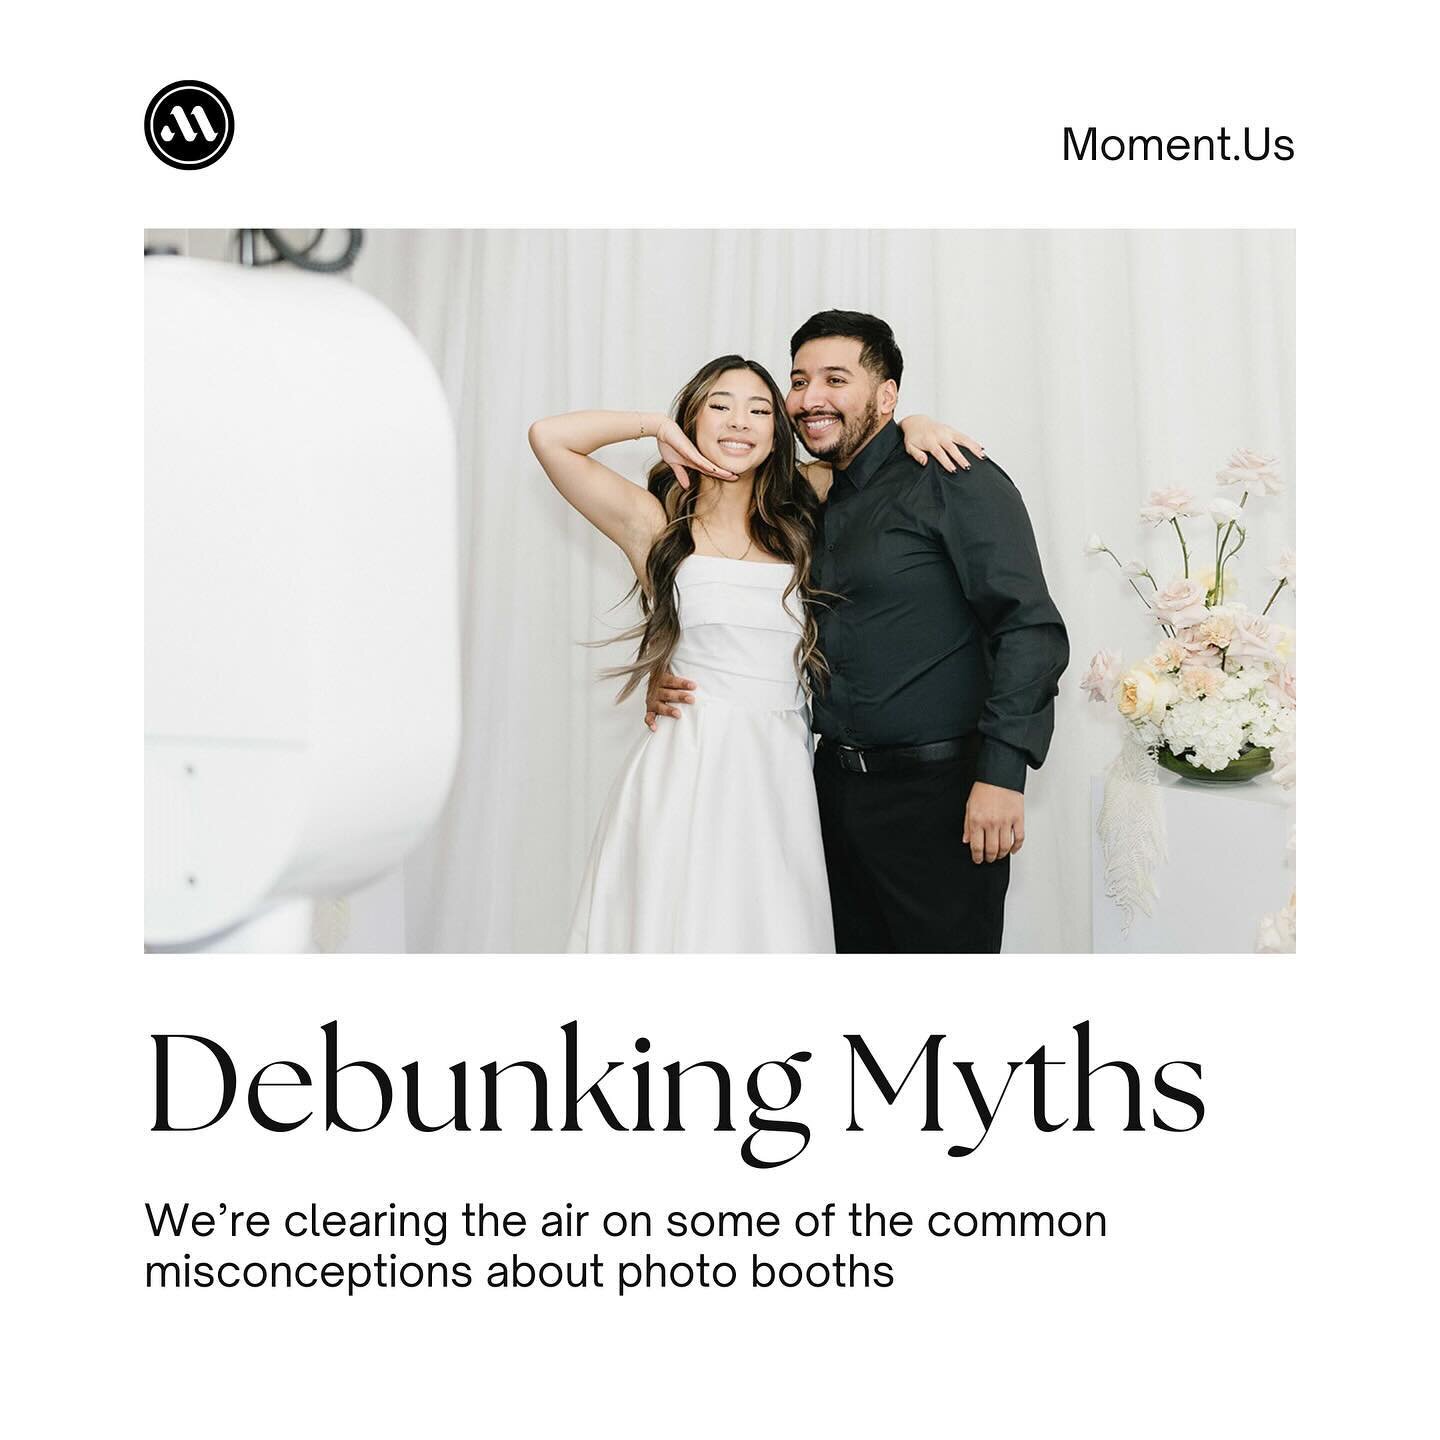 Mythbusting Mondays ✨We&rsquo;re kicking off this series of debunking some of the common misconceptions we hear about photo booths! Comment or send us a DM if you&rsquo;d like us to demystify anything about photo booths 🪄 #makeitmomentus #mythbustin